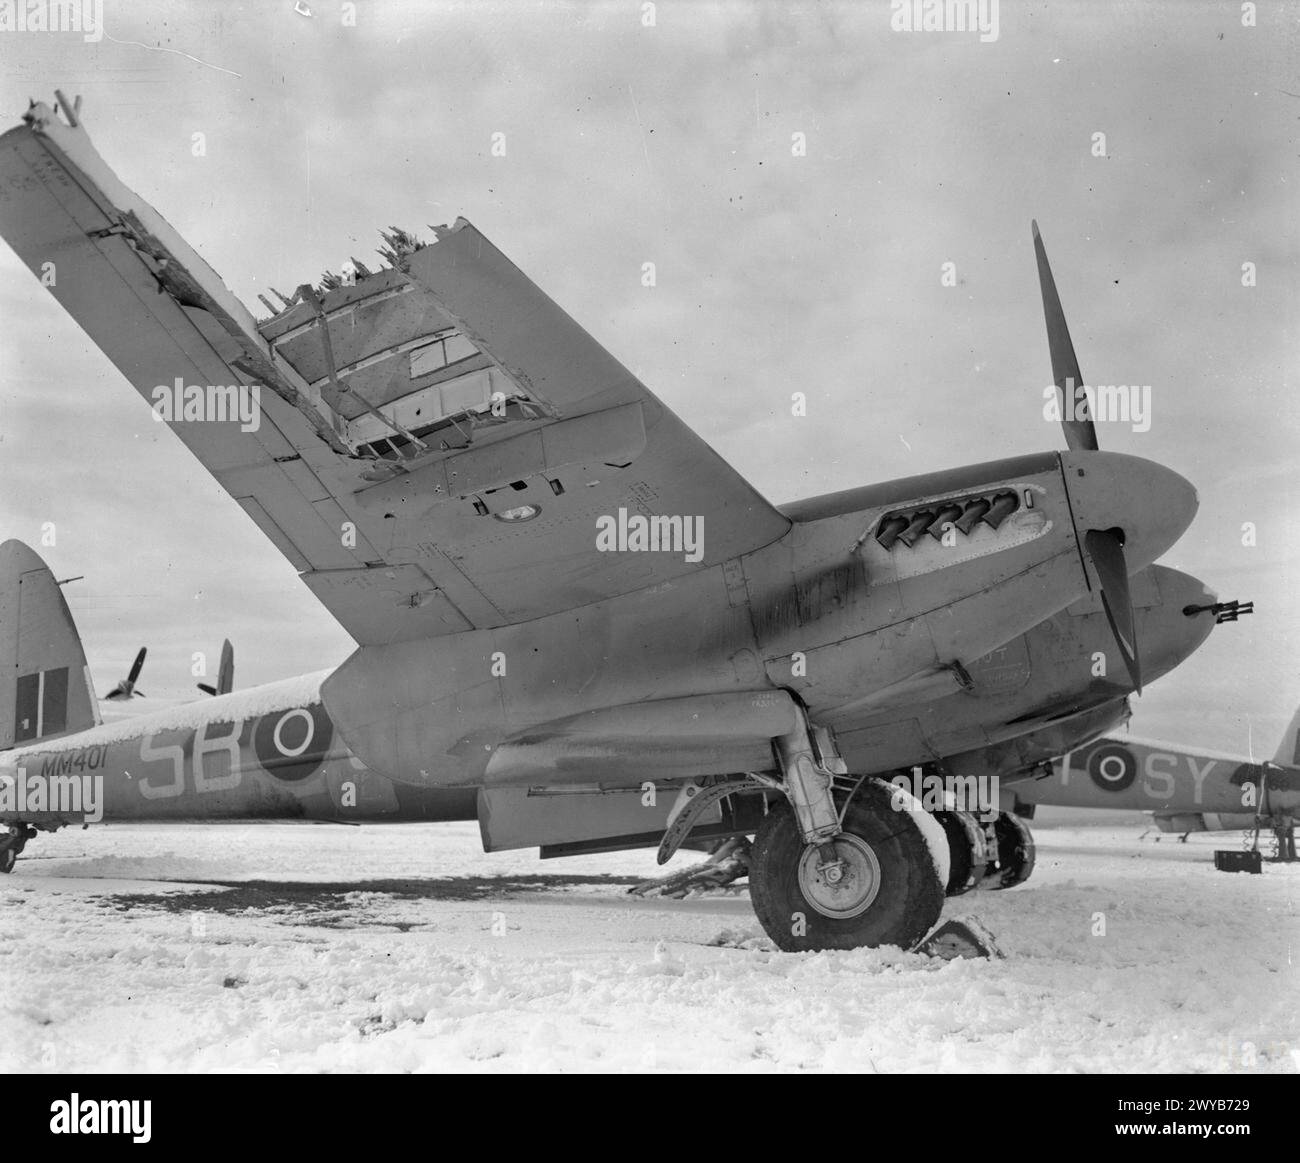 ROYAL AIR FORCE: 2ND TACTICAL AIR FORCE, 1943-1945. - Severely damaged De Havilland Mosquito FB Mark VI, MM401 'SB-J', of No. 464 Squadron RAAF based at Hunsdon, Hertfordshire, parked at Friston Emergency Landing Ground, Sussex. The aircraft, flown by Squadron Leader A G Oxlade (pilot) and Flight Lieutenant D M Shanks (navigator), was hit by anti-aircraft fire while attacking a flying-bomb site in the Pas de Calais on 21 February 1944. The port engine was shattered, and the port undercarriage and most of the outer starboard wing was blown off. Despite the damage, the crew flew MM401 back and c Stock Photo